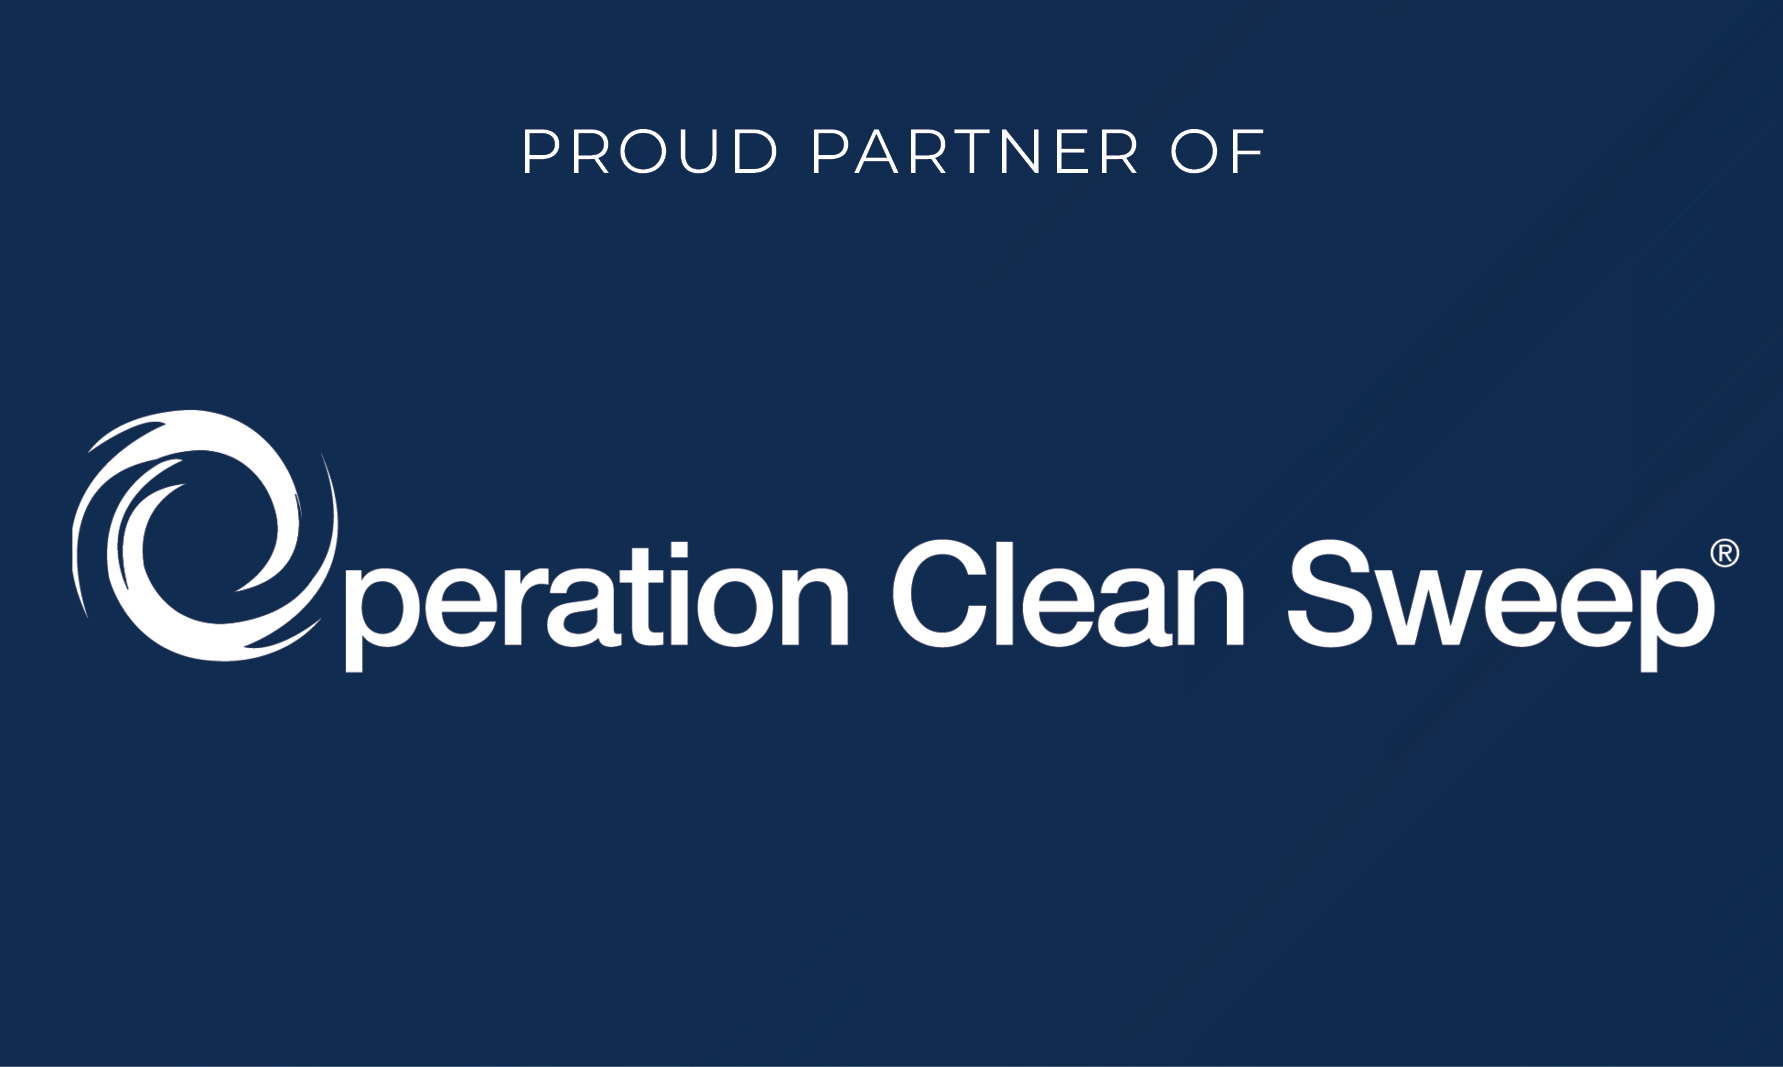 Viaflex is a Proud Partner of Operation Clean Sweep